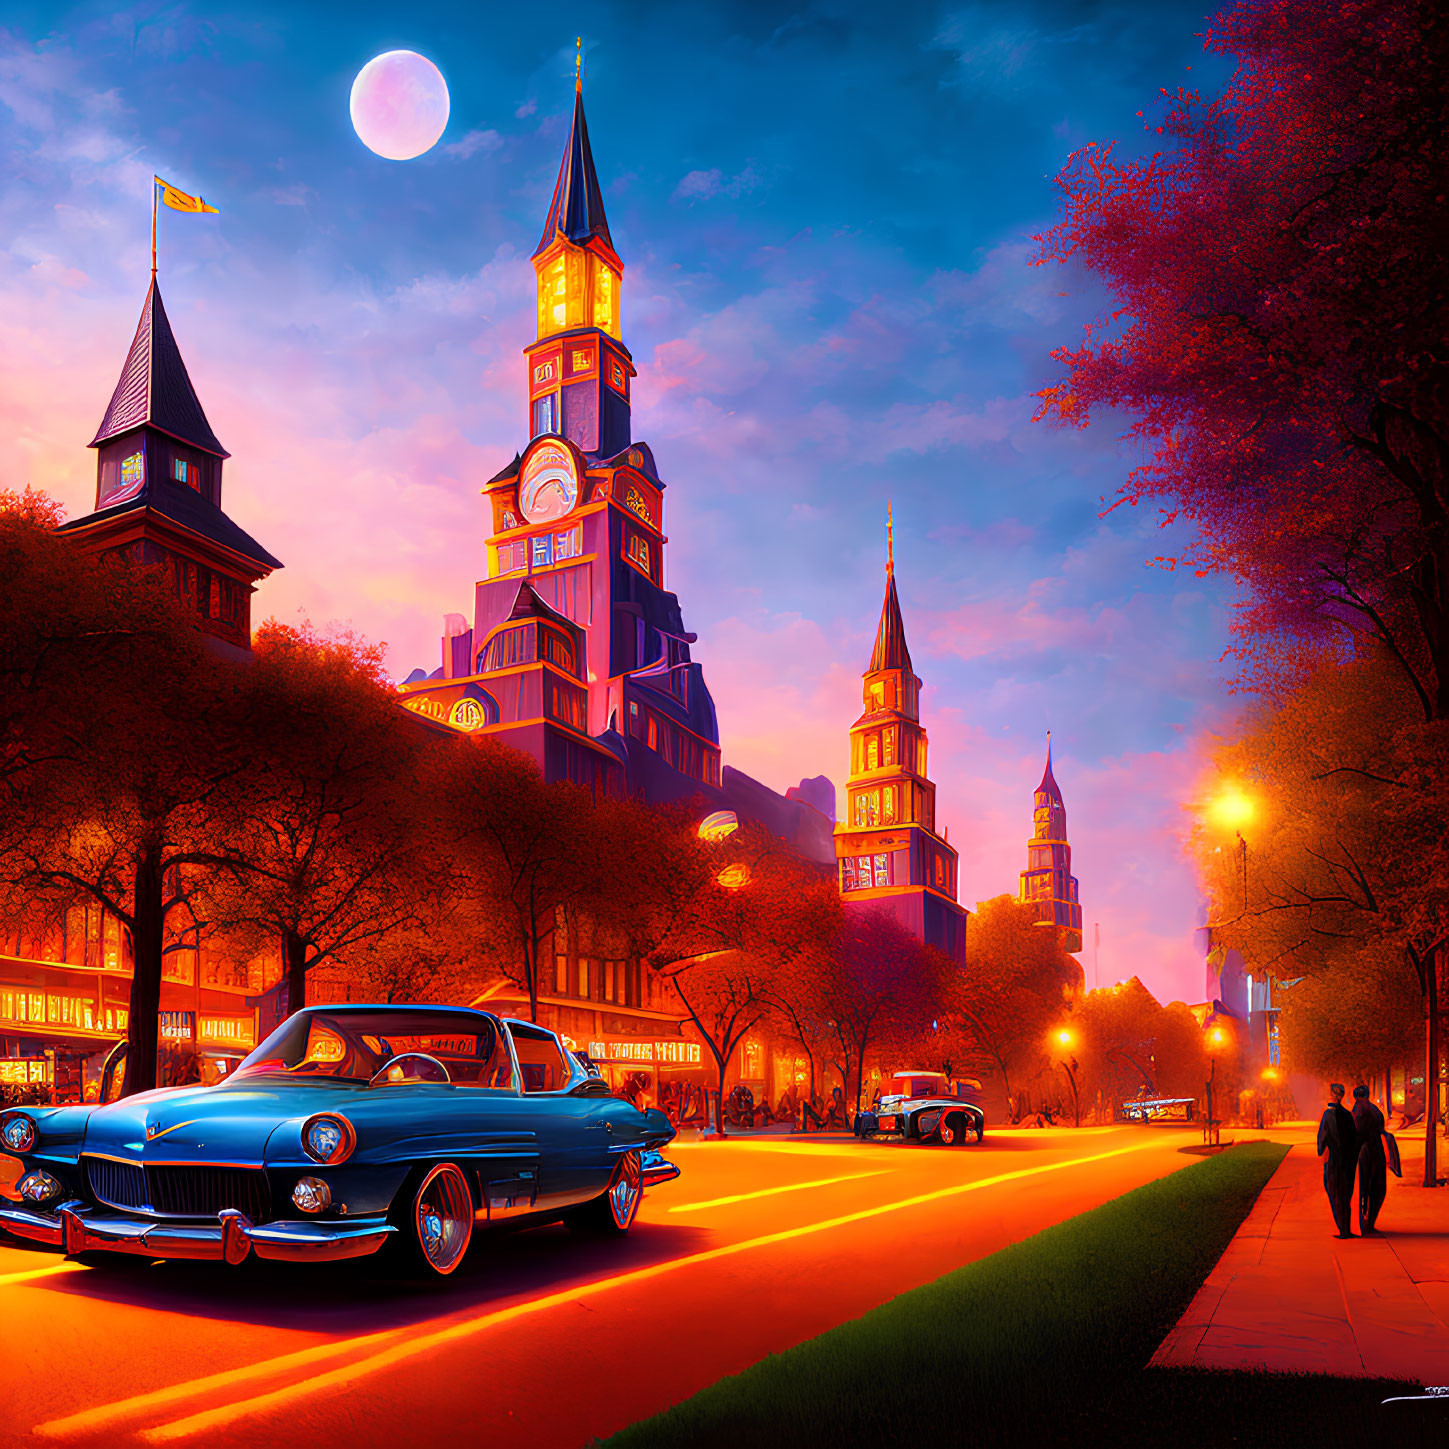 Gothic architecture and vintage car in vibrant cityscape twilight.